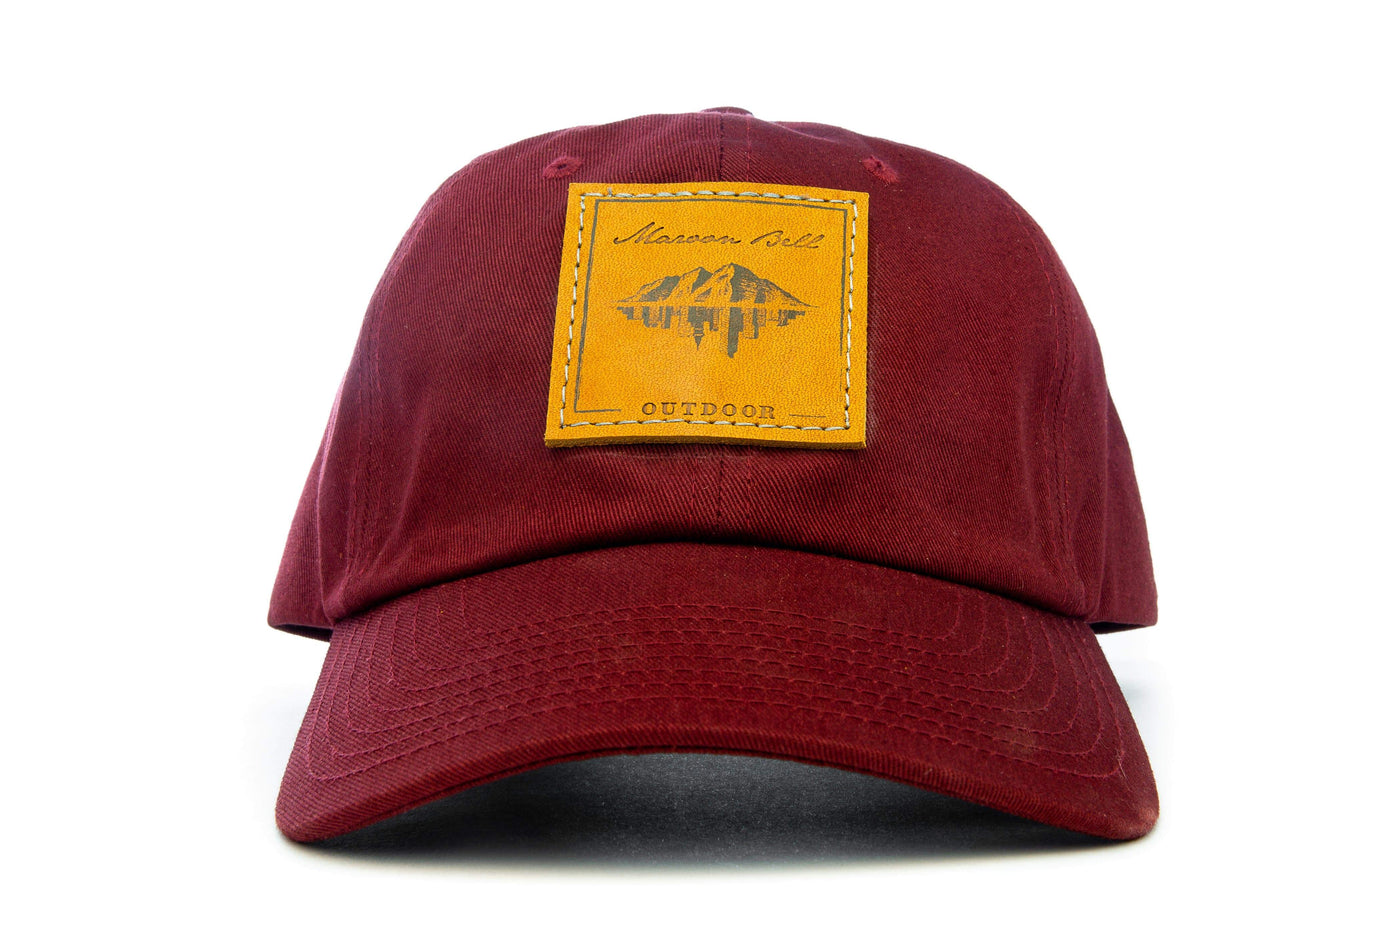 Urban Hiking Hat - Maroon with Leather Patch Hats Maroon Bell Outdoor 